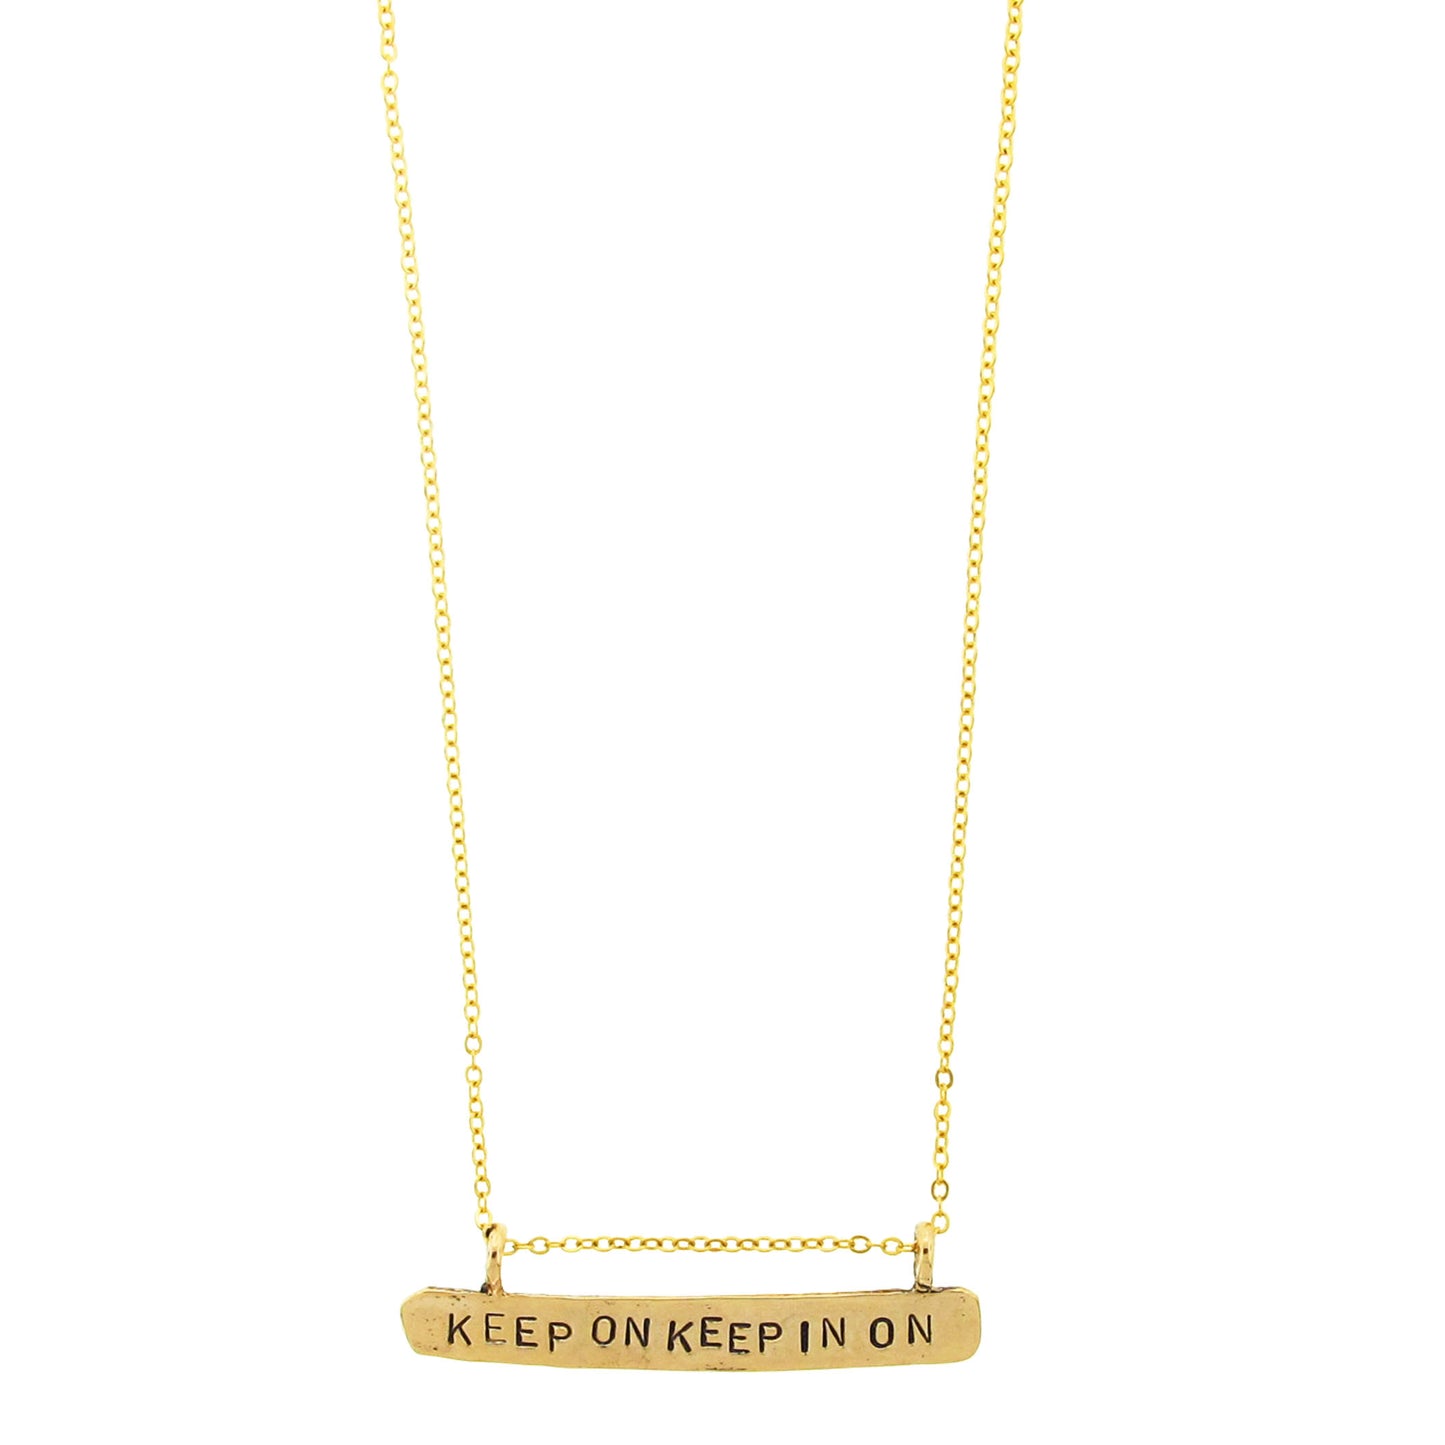 KEEP ON KEEP IN ON NECKLACE